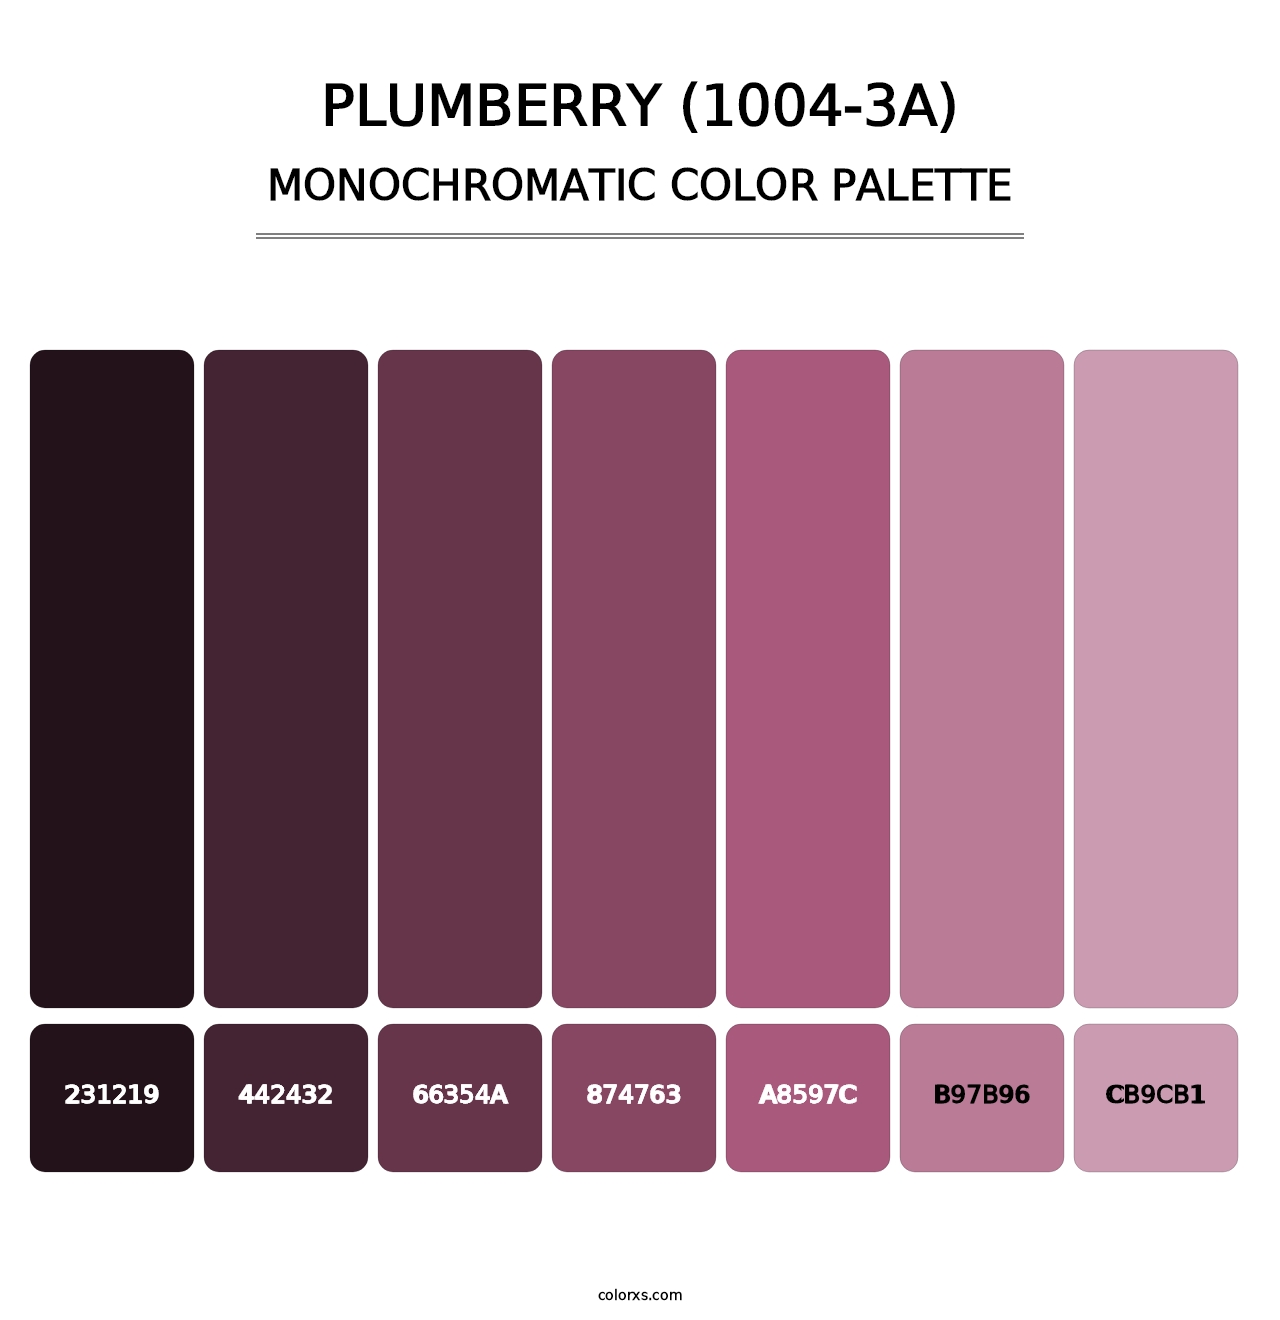 Plumberry (1004-3A) - Monochromatic Color Palette